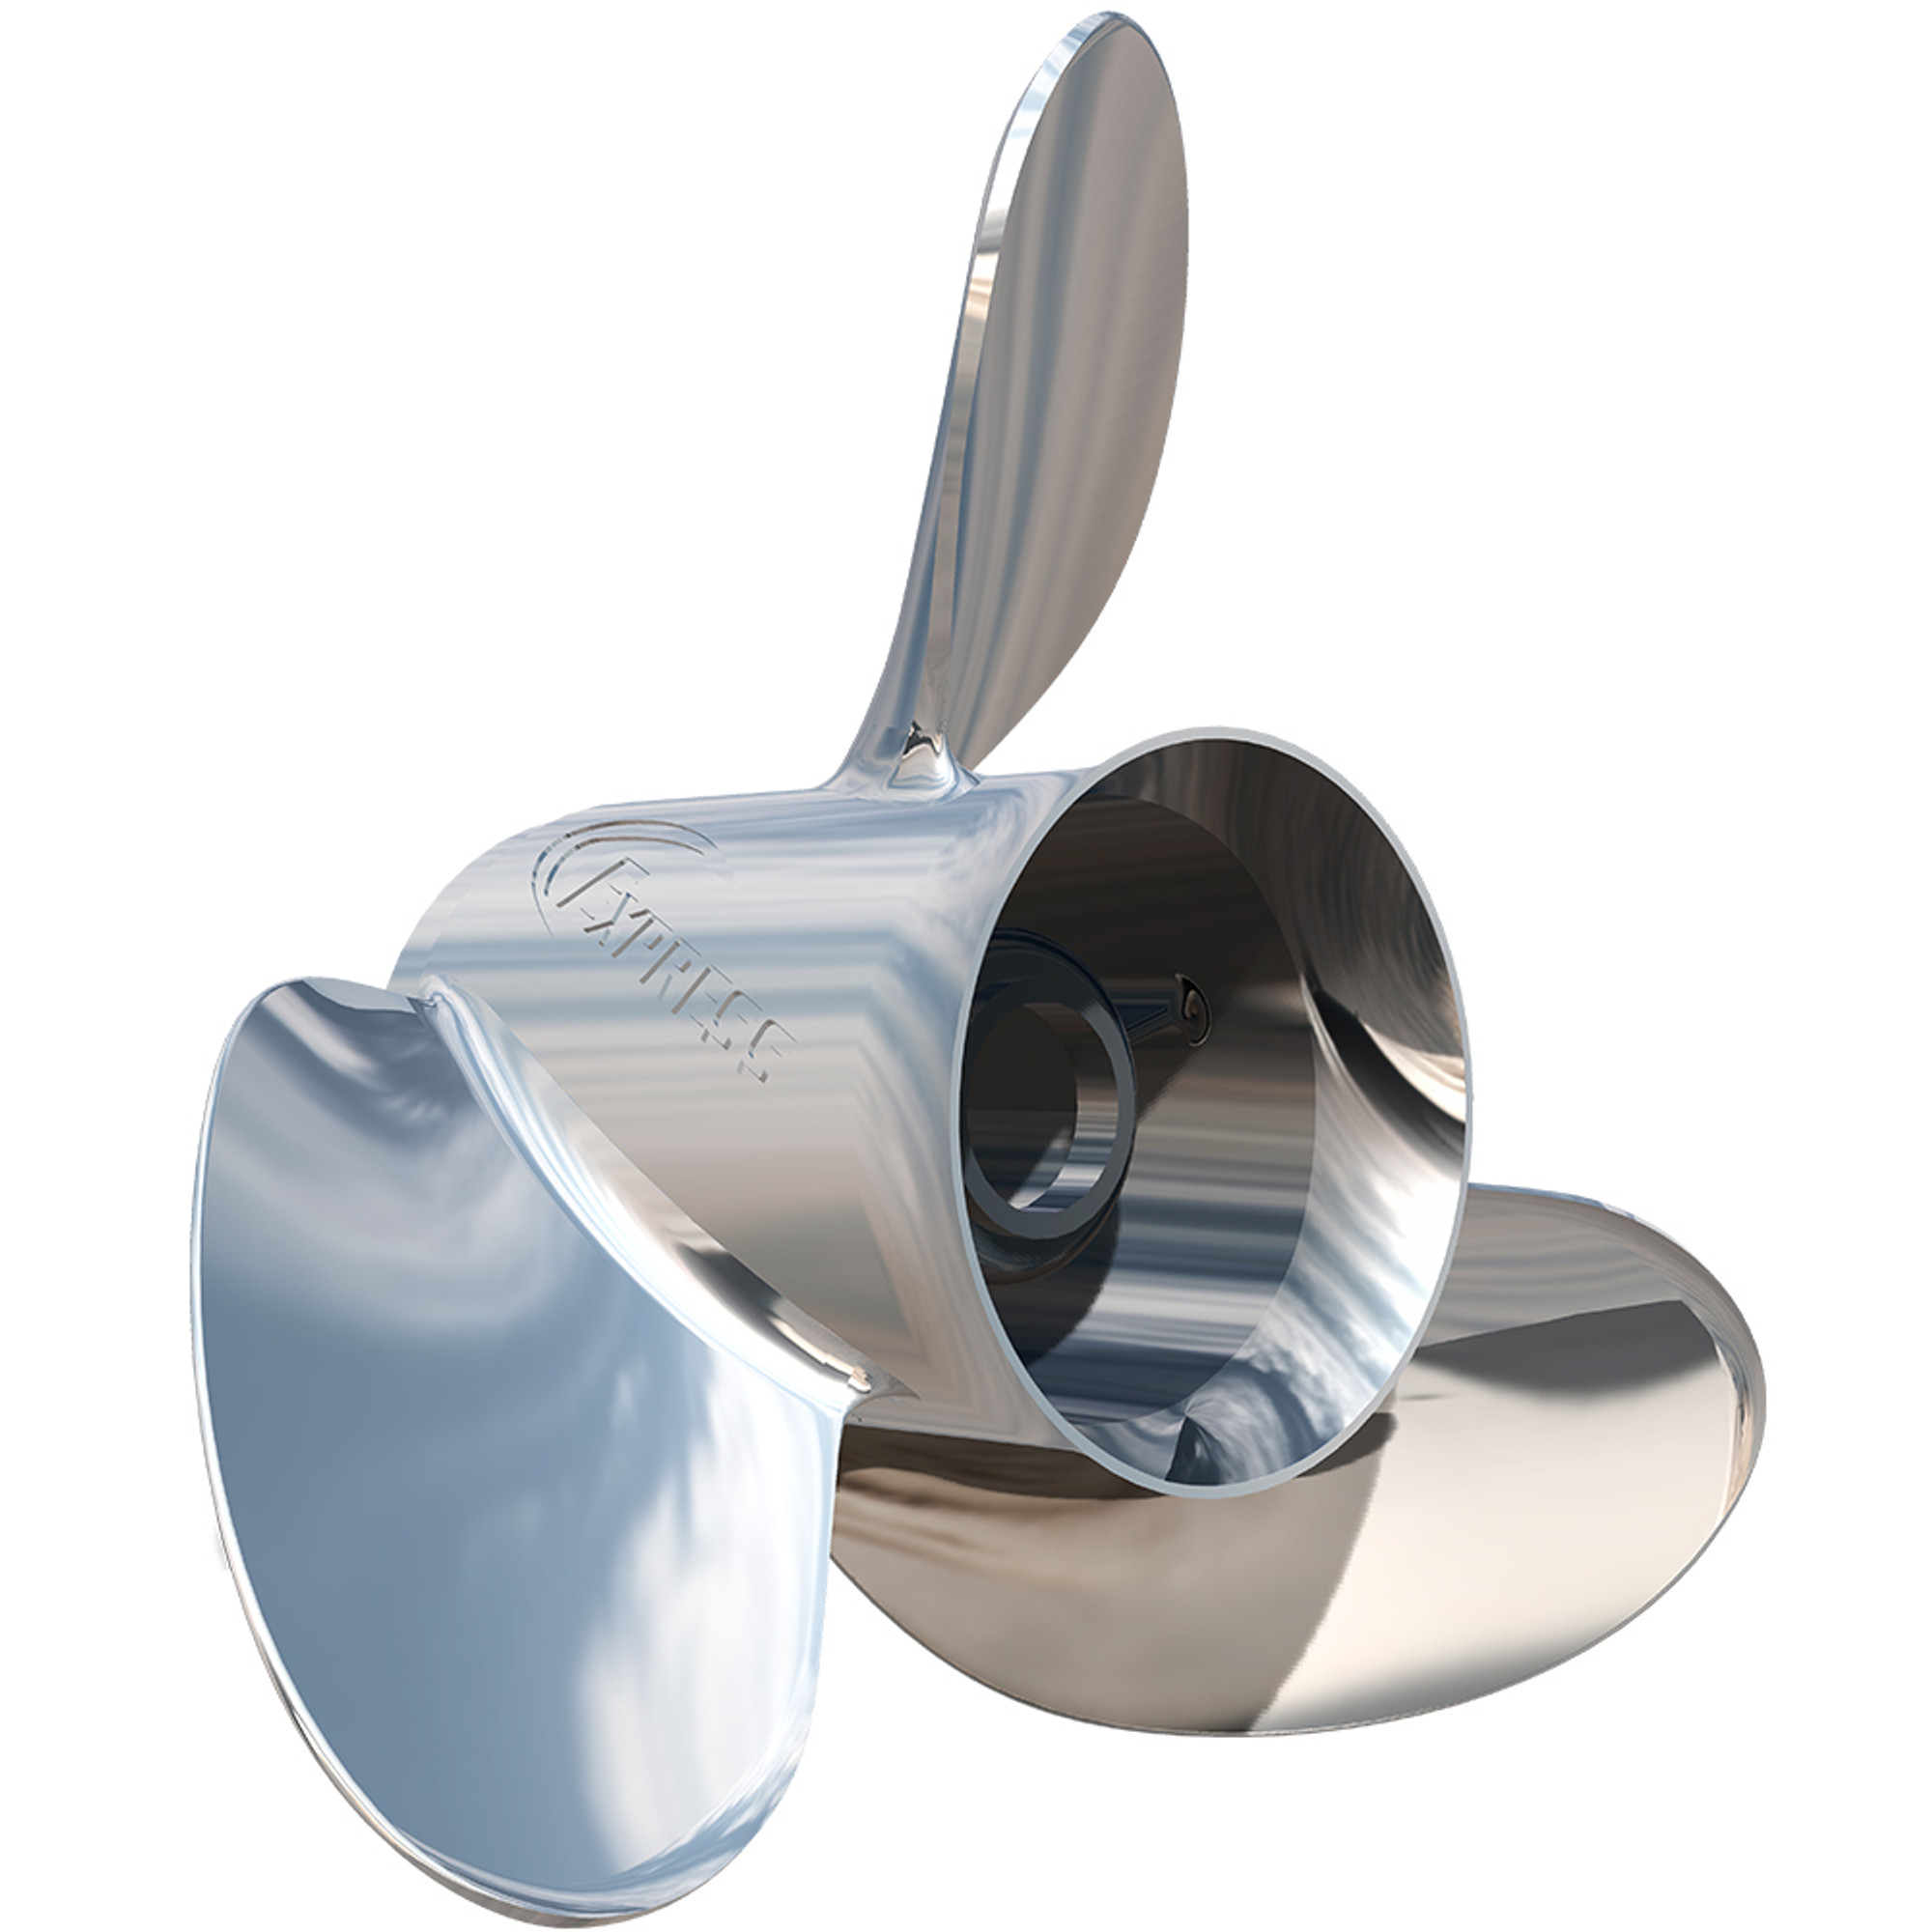 Turning Point Express Mach3 - Right Hand - Stainless Steel Propeller - EX-1421 - 3-Blade - 14.25" x 21 Pitch